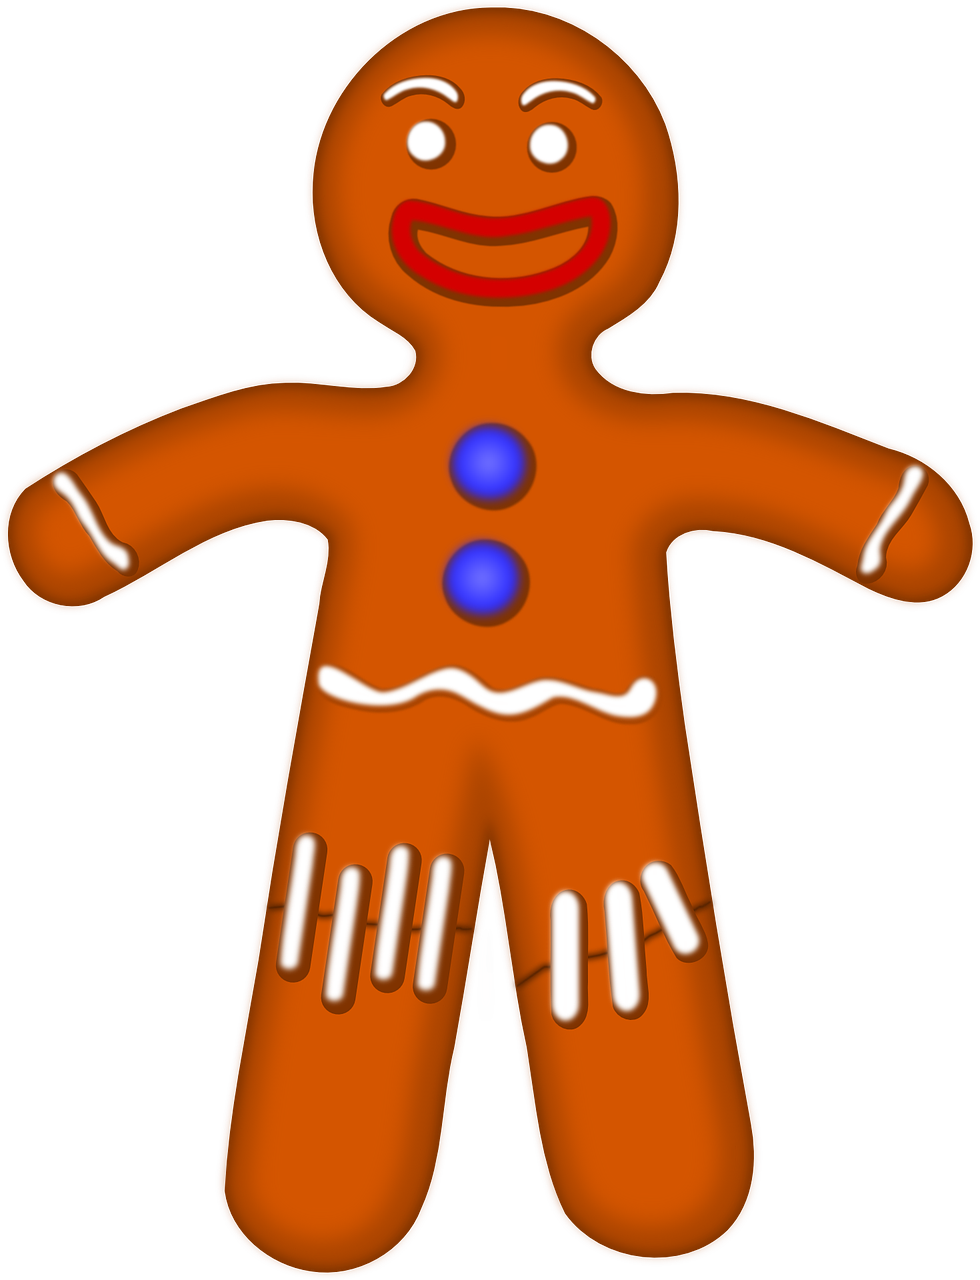 gingerman biscuit gingerbread free photo